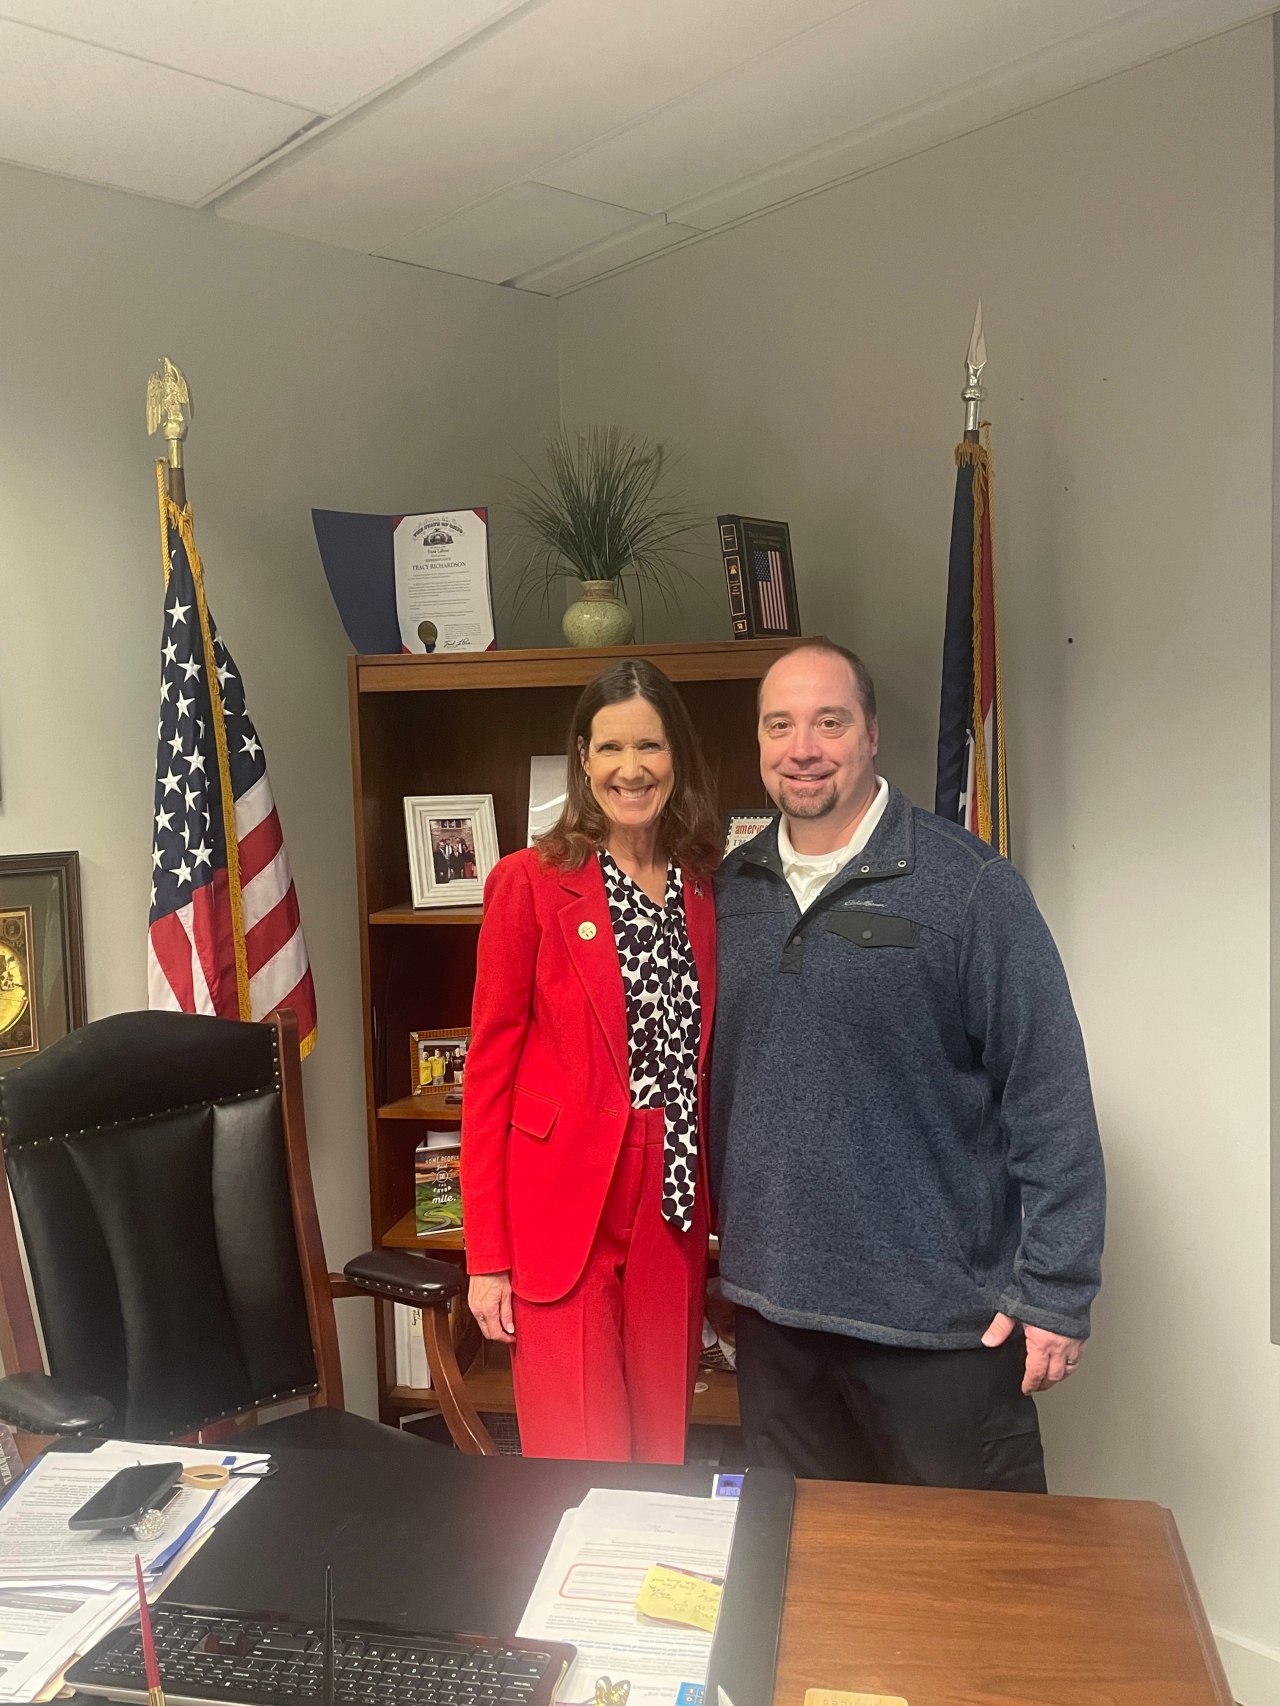 Representative Richardson was excited to welcome fellow veteran and constituent, Jeremy Miller, to her office to discuss legislative issues impacting Ohio's veteran community.